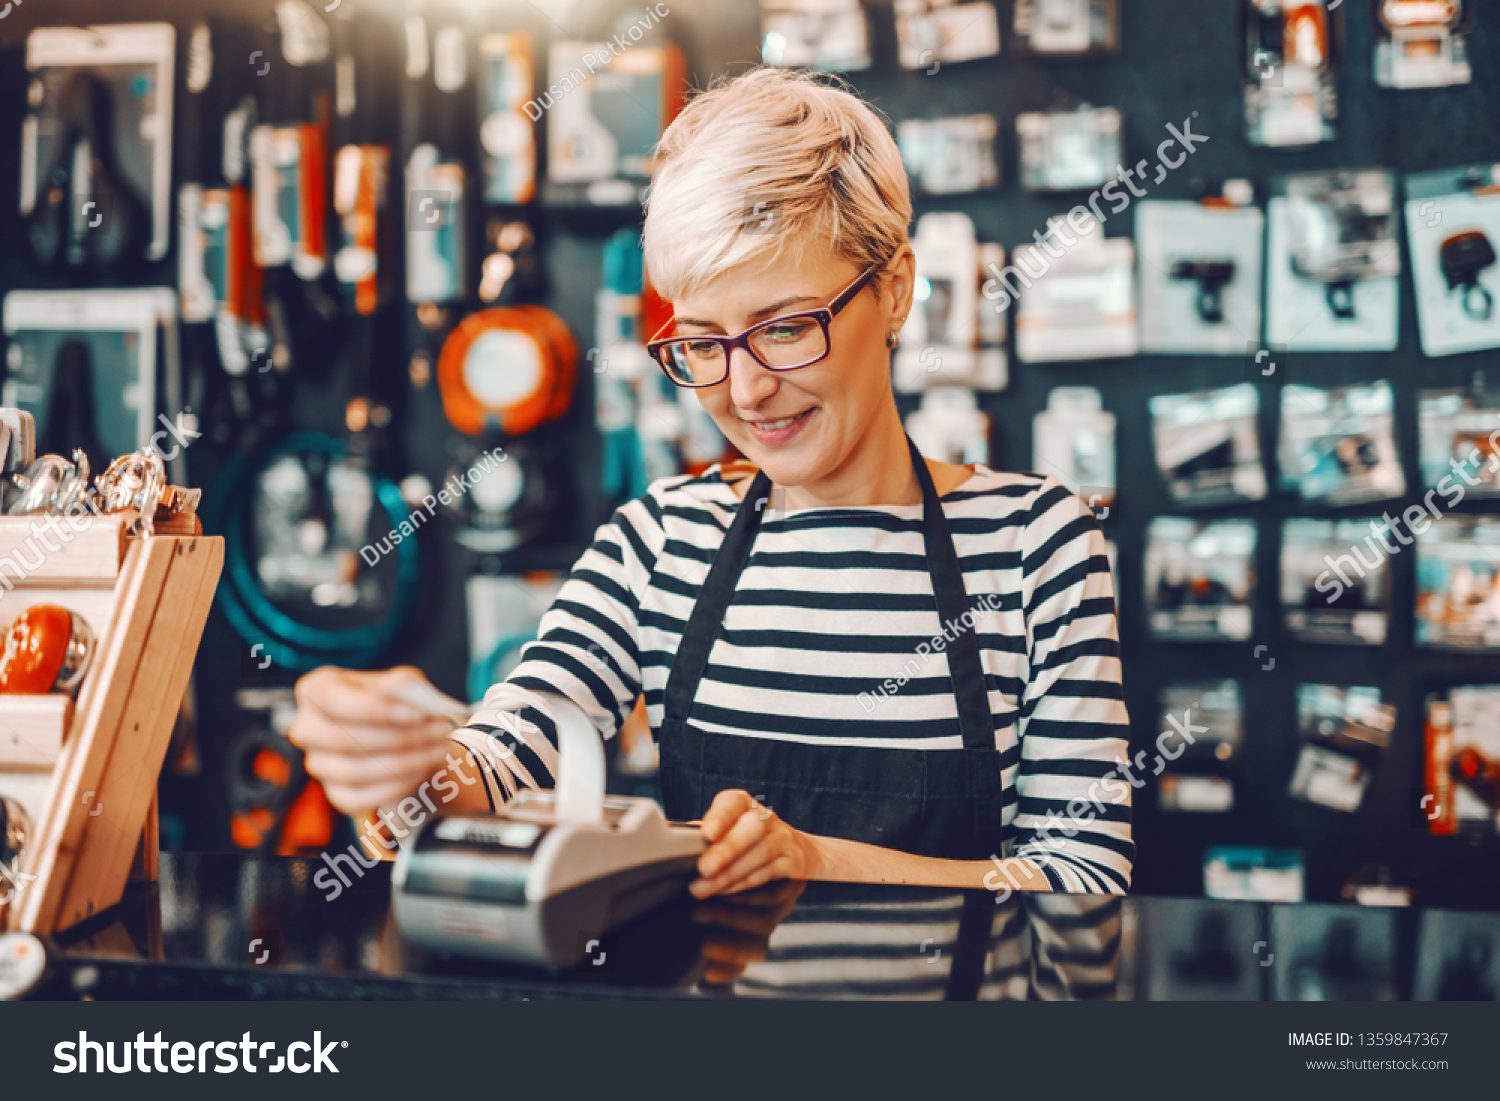 Smiling Caucasian female worker with short blonde hair and eyeglasses using cash register while standing in bicycle store. #1359847367